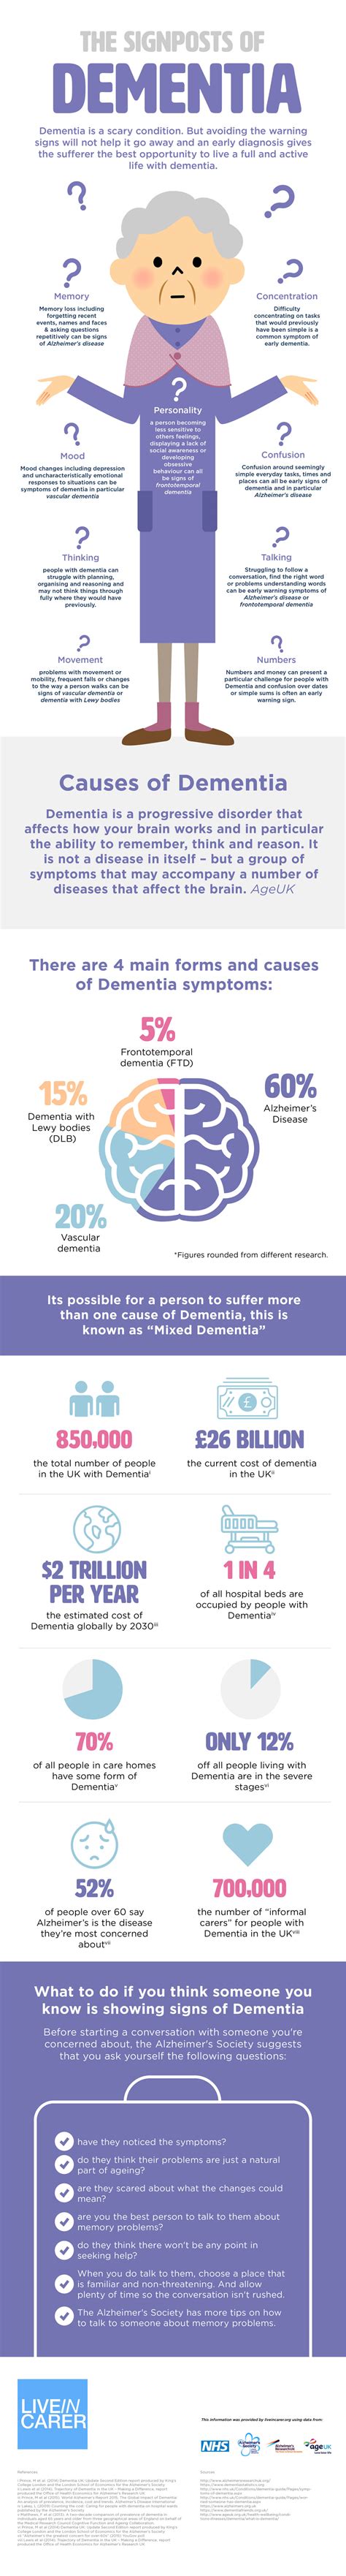 The Signs And Symptoms Of Dementia Infographic